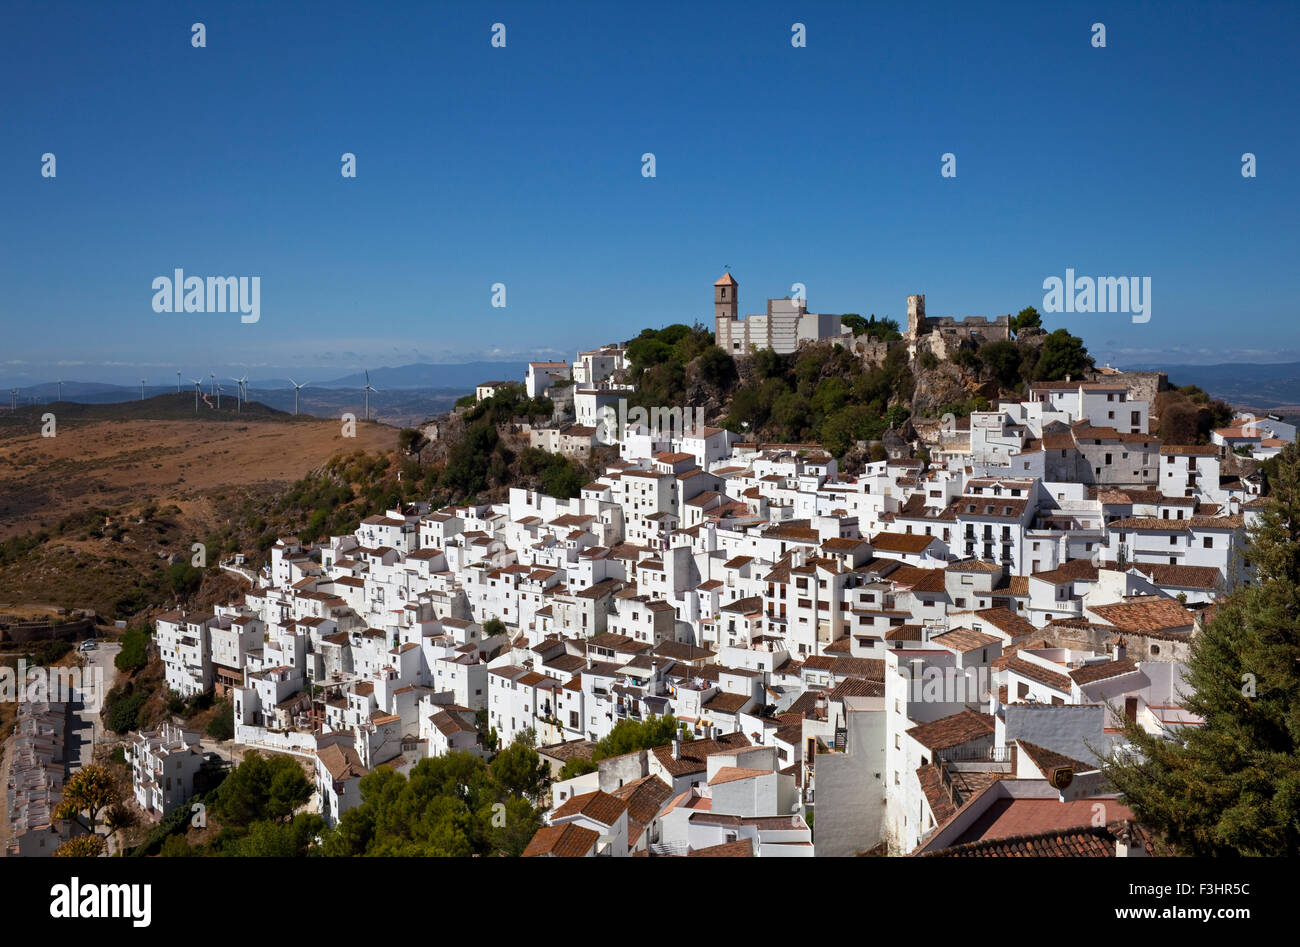 The "White" villages of Casares with it's Moorish Castle, Malaga Province, Andalucia, Spain Stock Photo